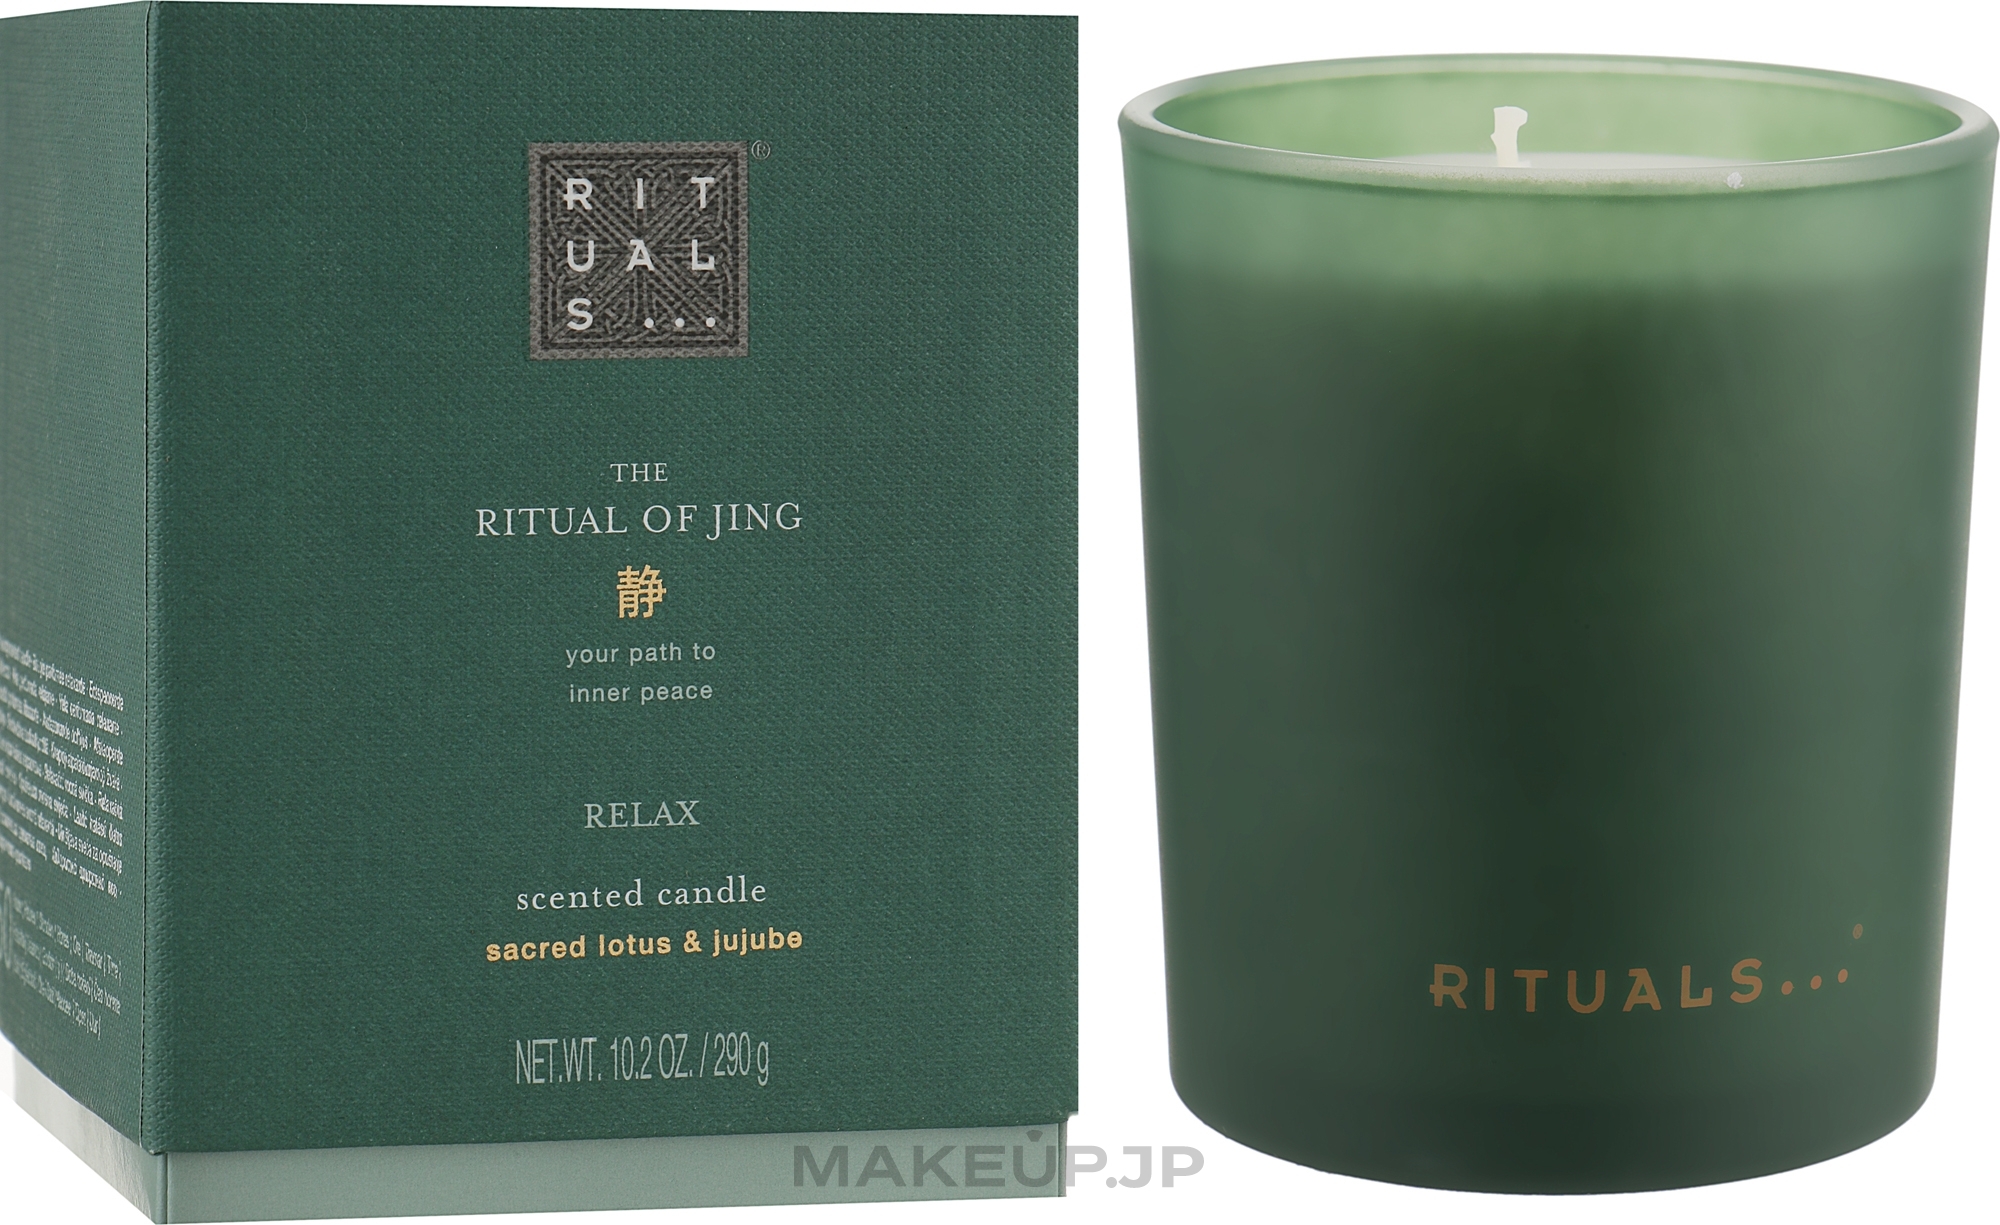 Scented Candle - Rituals The Ritual Of Jing Relax Scented Candle — photo 290 g